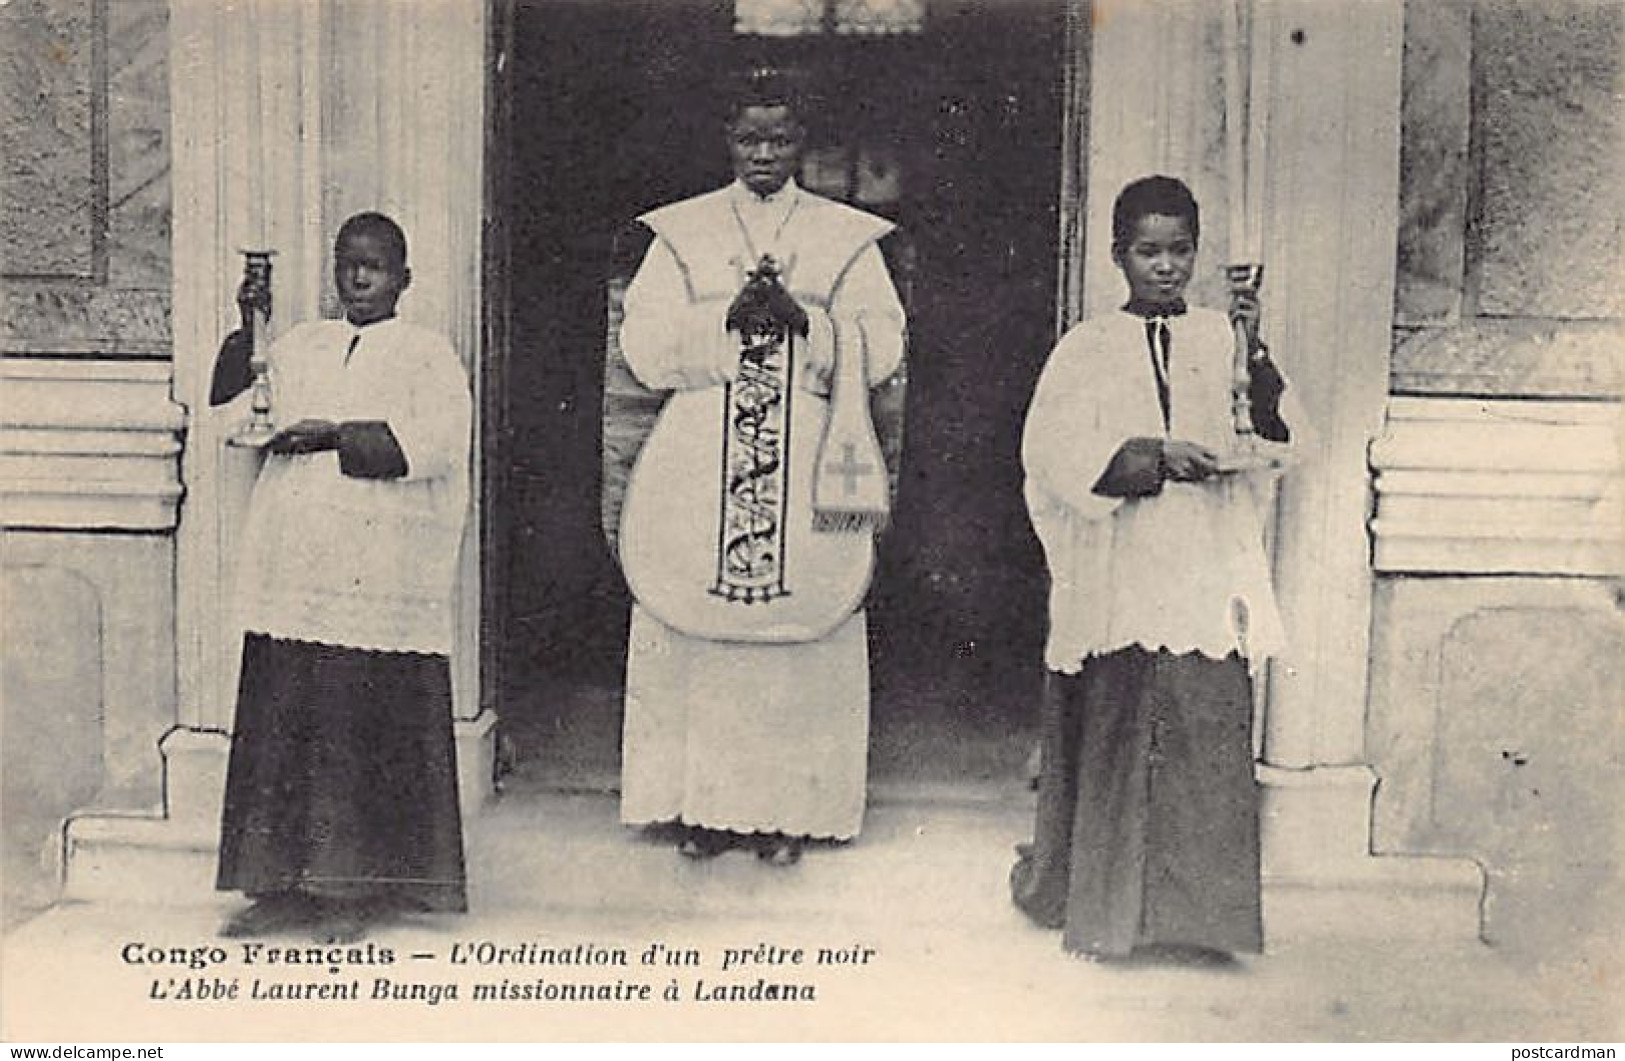 ANGOLA - The Ordination Of A Black Priest, Abbot Laurent Bunga, Missionary In Lândana, Cabinda - Ed. Missions Of The Fat - Angola